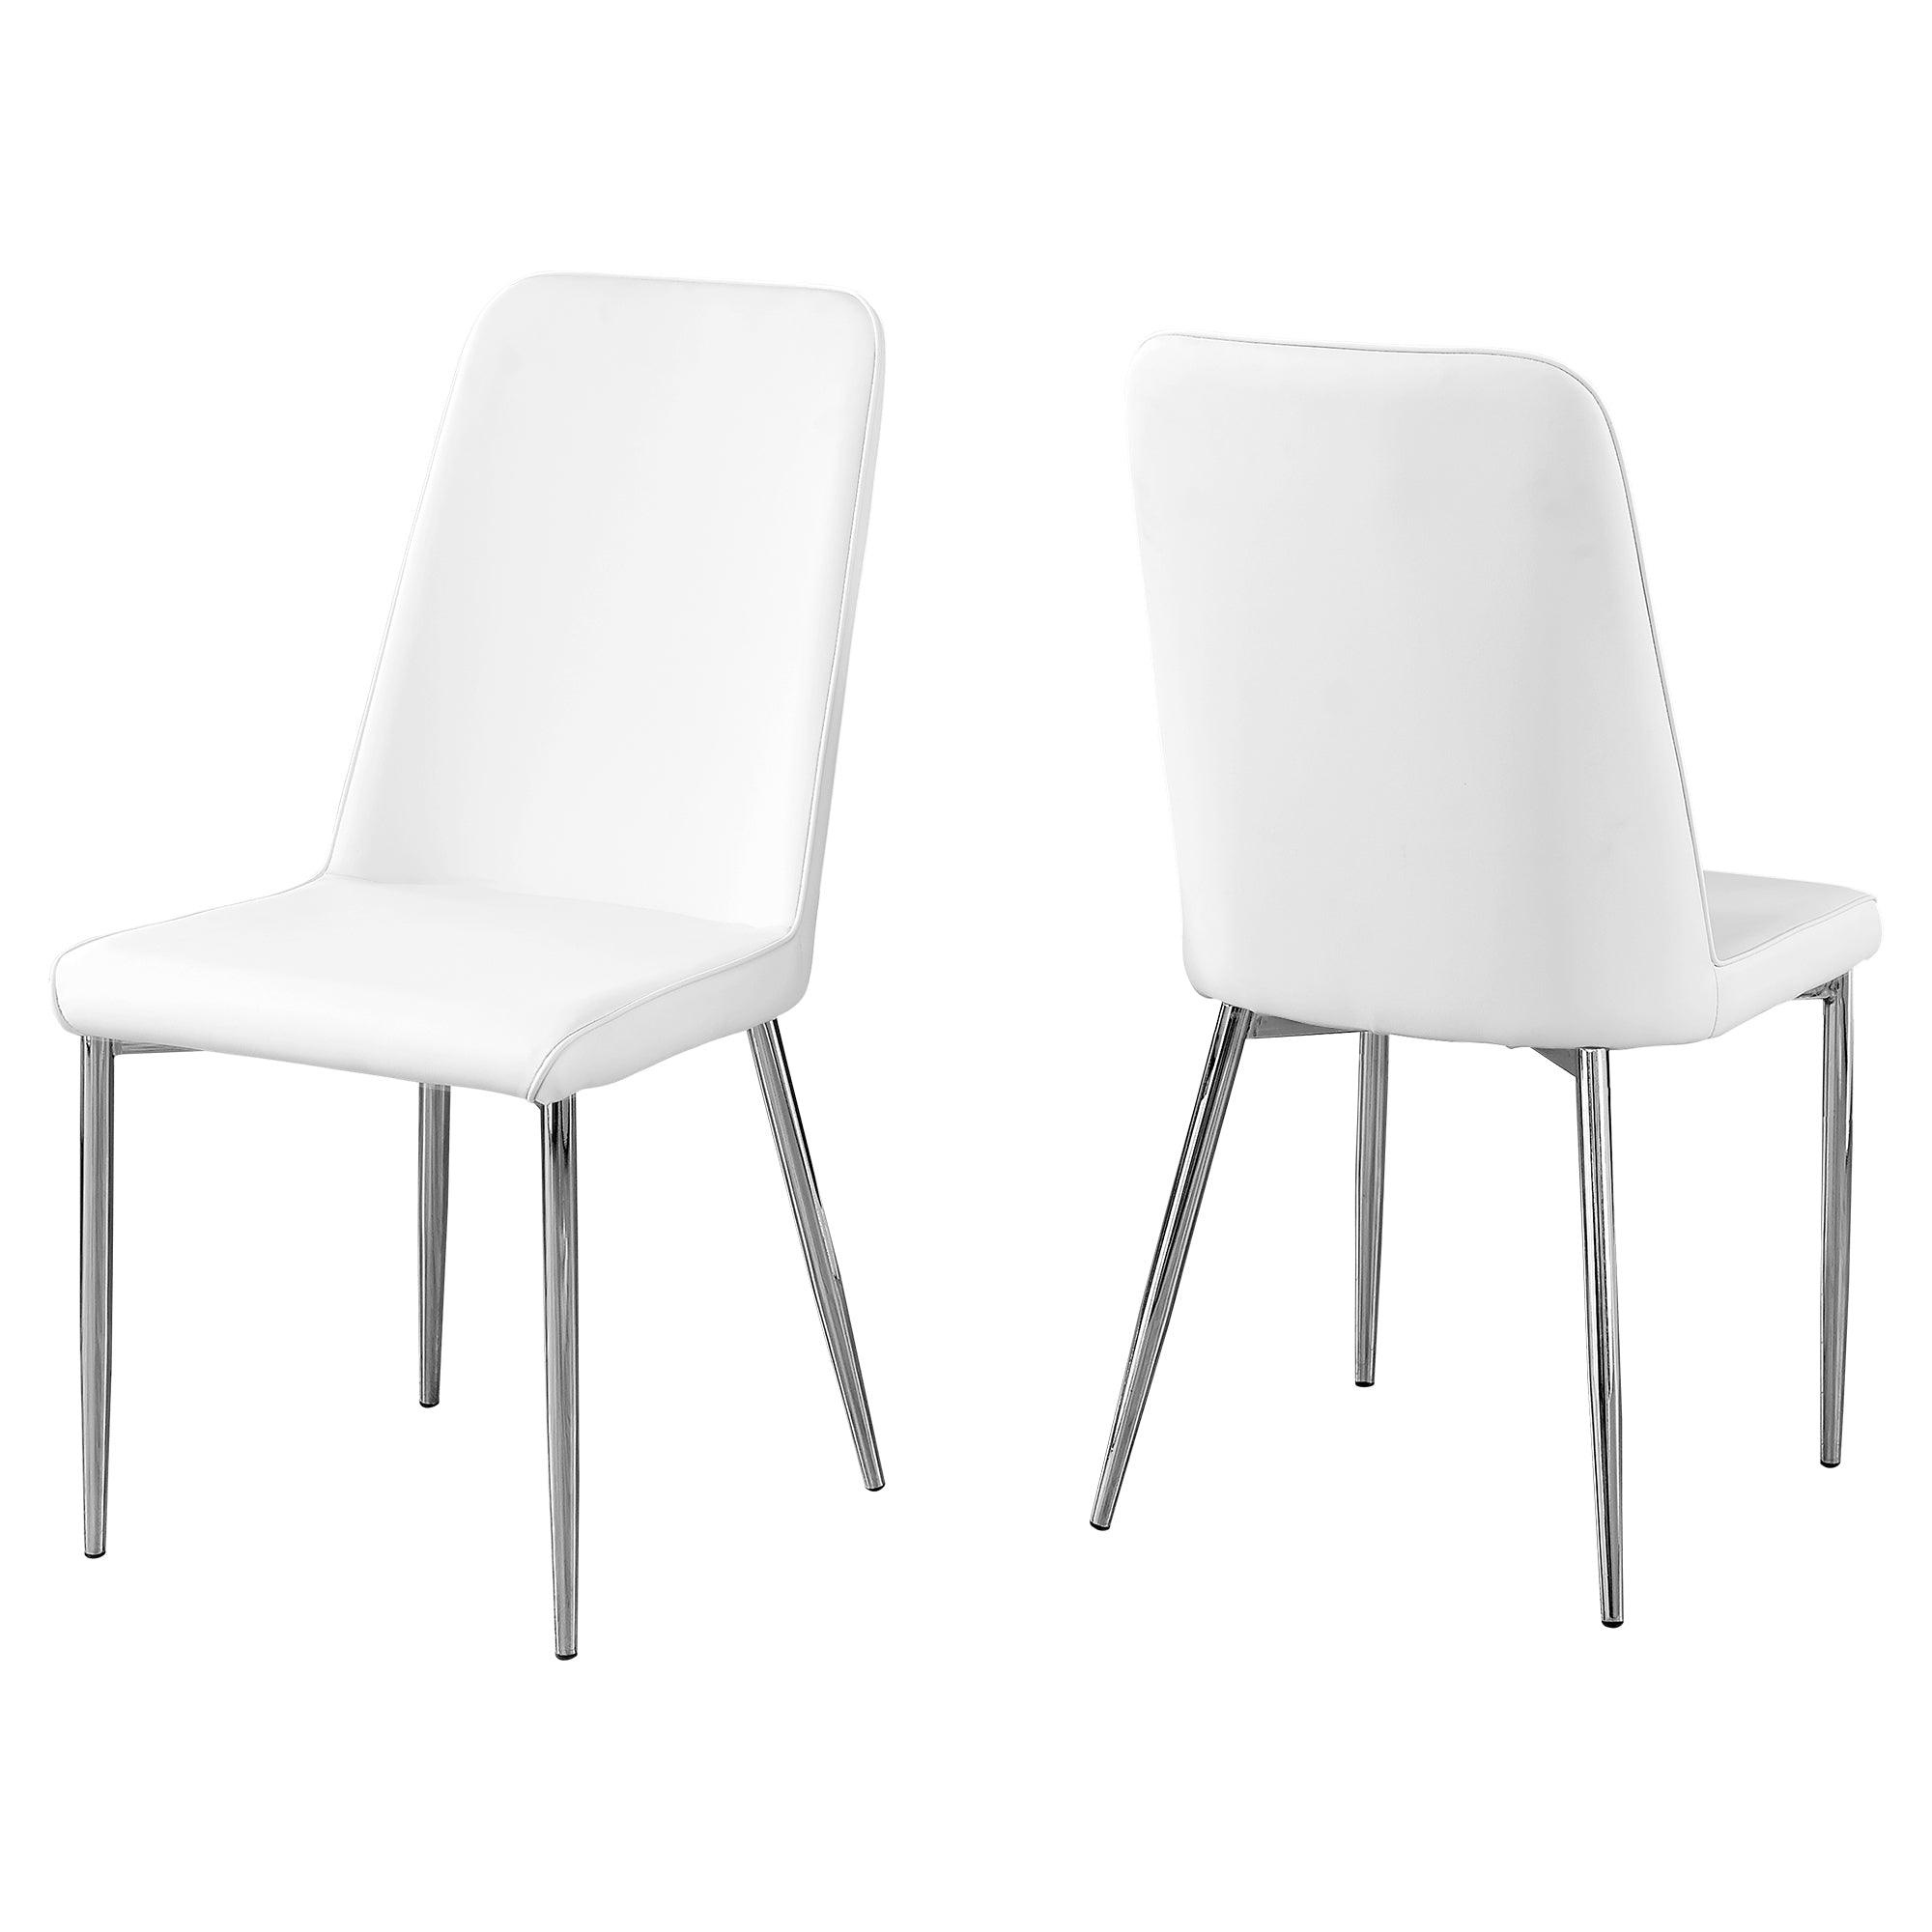 MN-181033    Dining Chair, Set Of 2, Side, Pu Leather-Look, Upholstered, Metal Legs, Kitchen, Dining Room, Leather Look, Metal Legs, White, Chrome, Contemporary, Modern